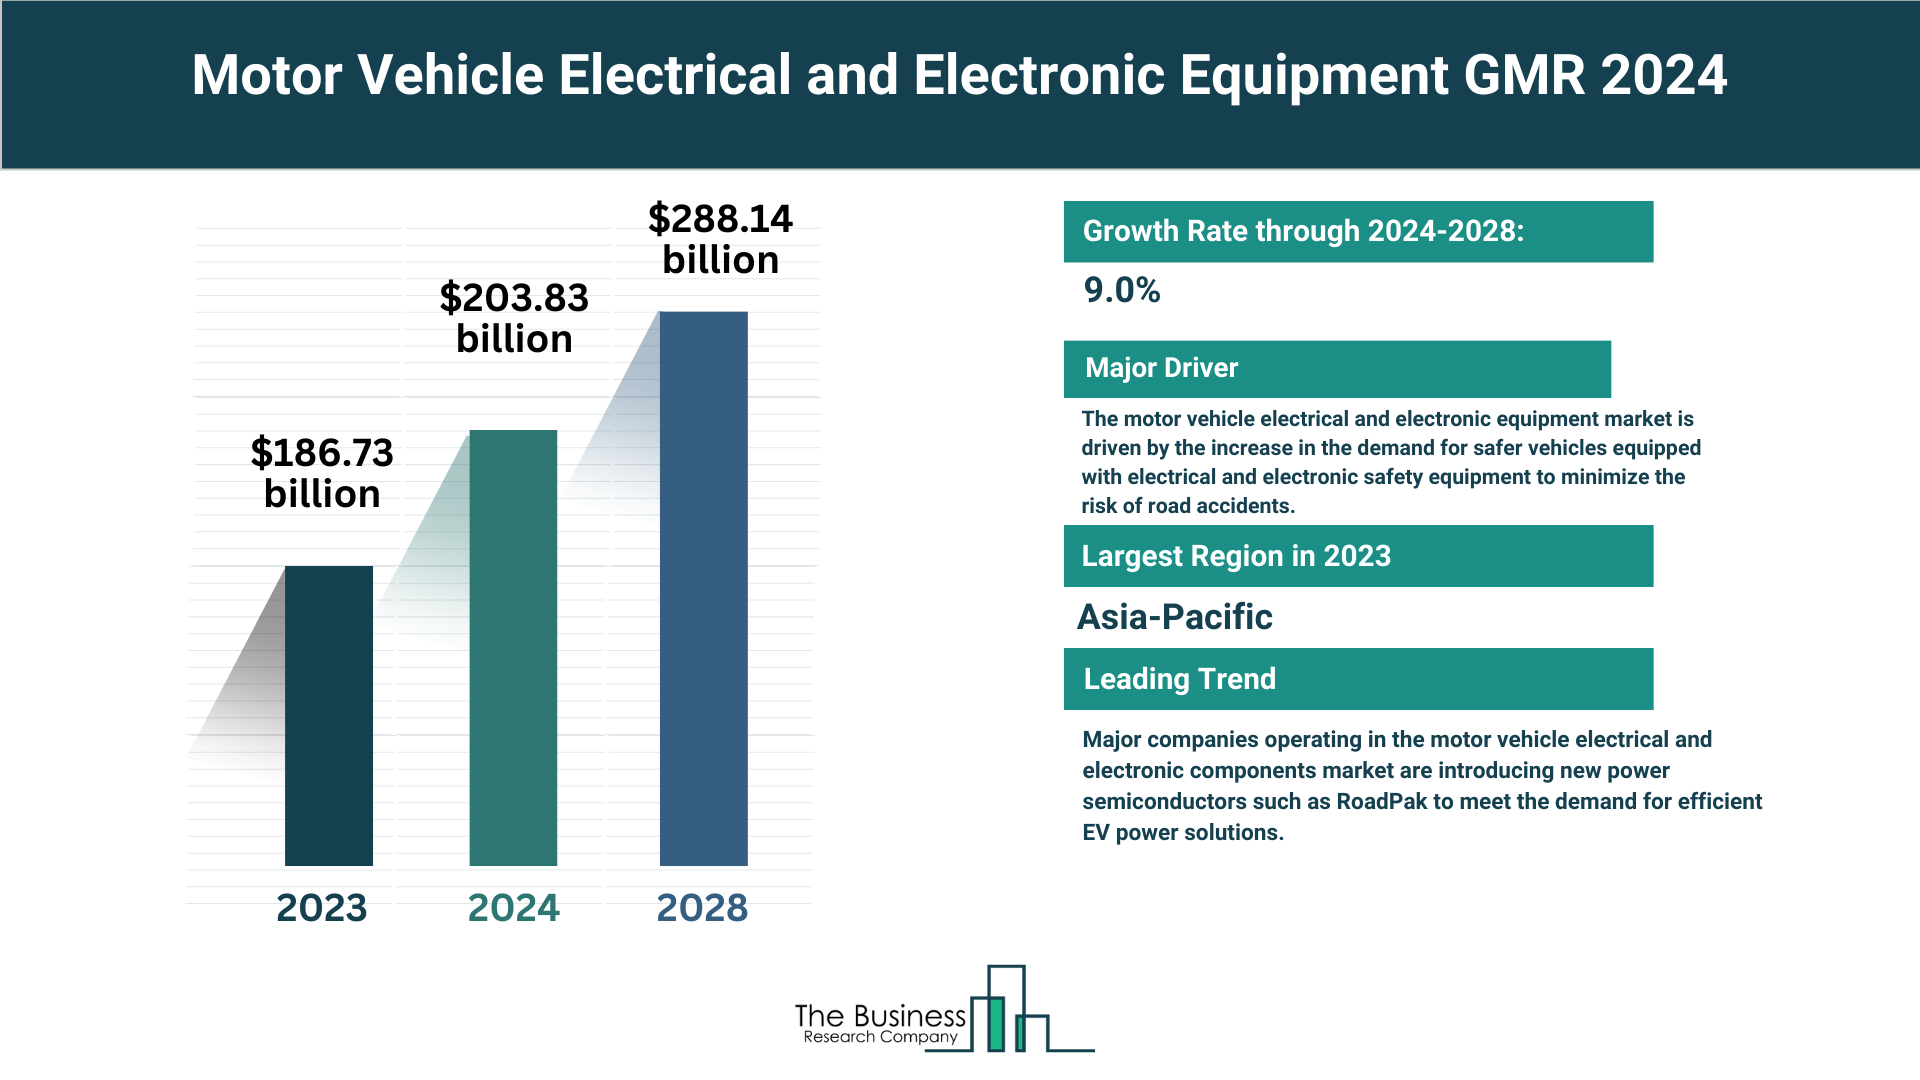 Global Motor Vehicle Electrical and Electronic Equipment Market